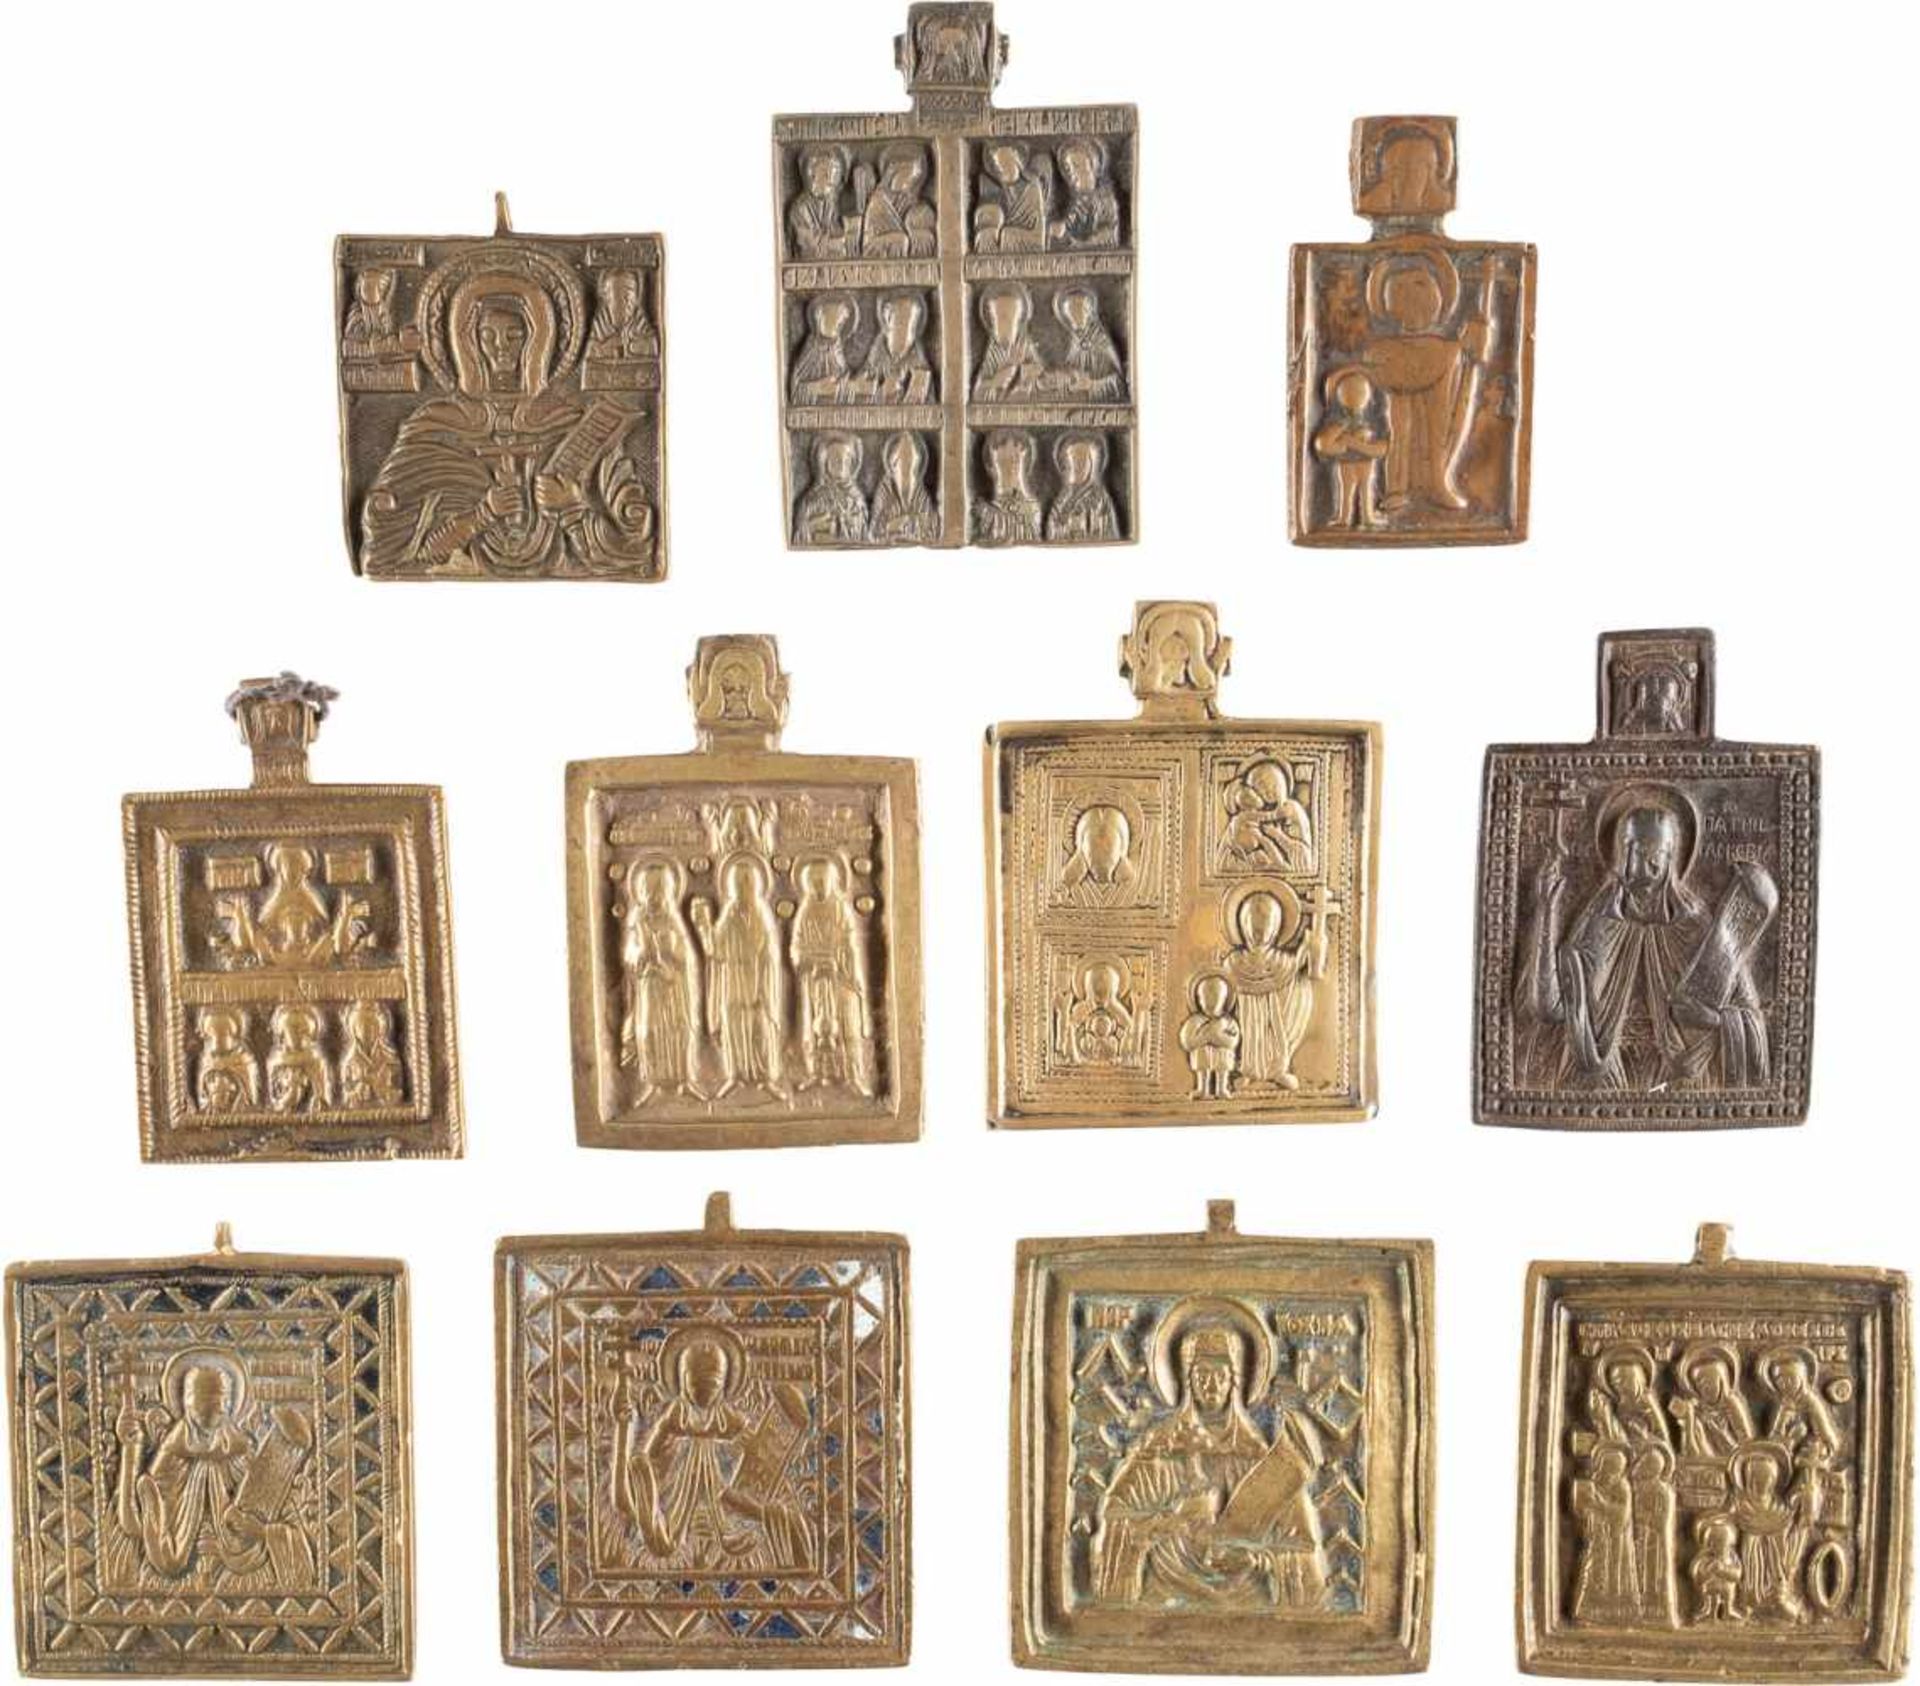 A COLLECTION OF ELEVEN BRASS ICONS SHOWING SELECTED SAINTS